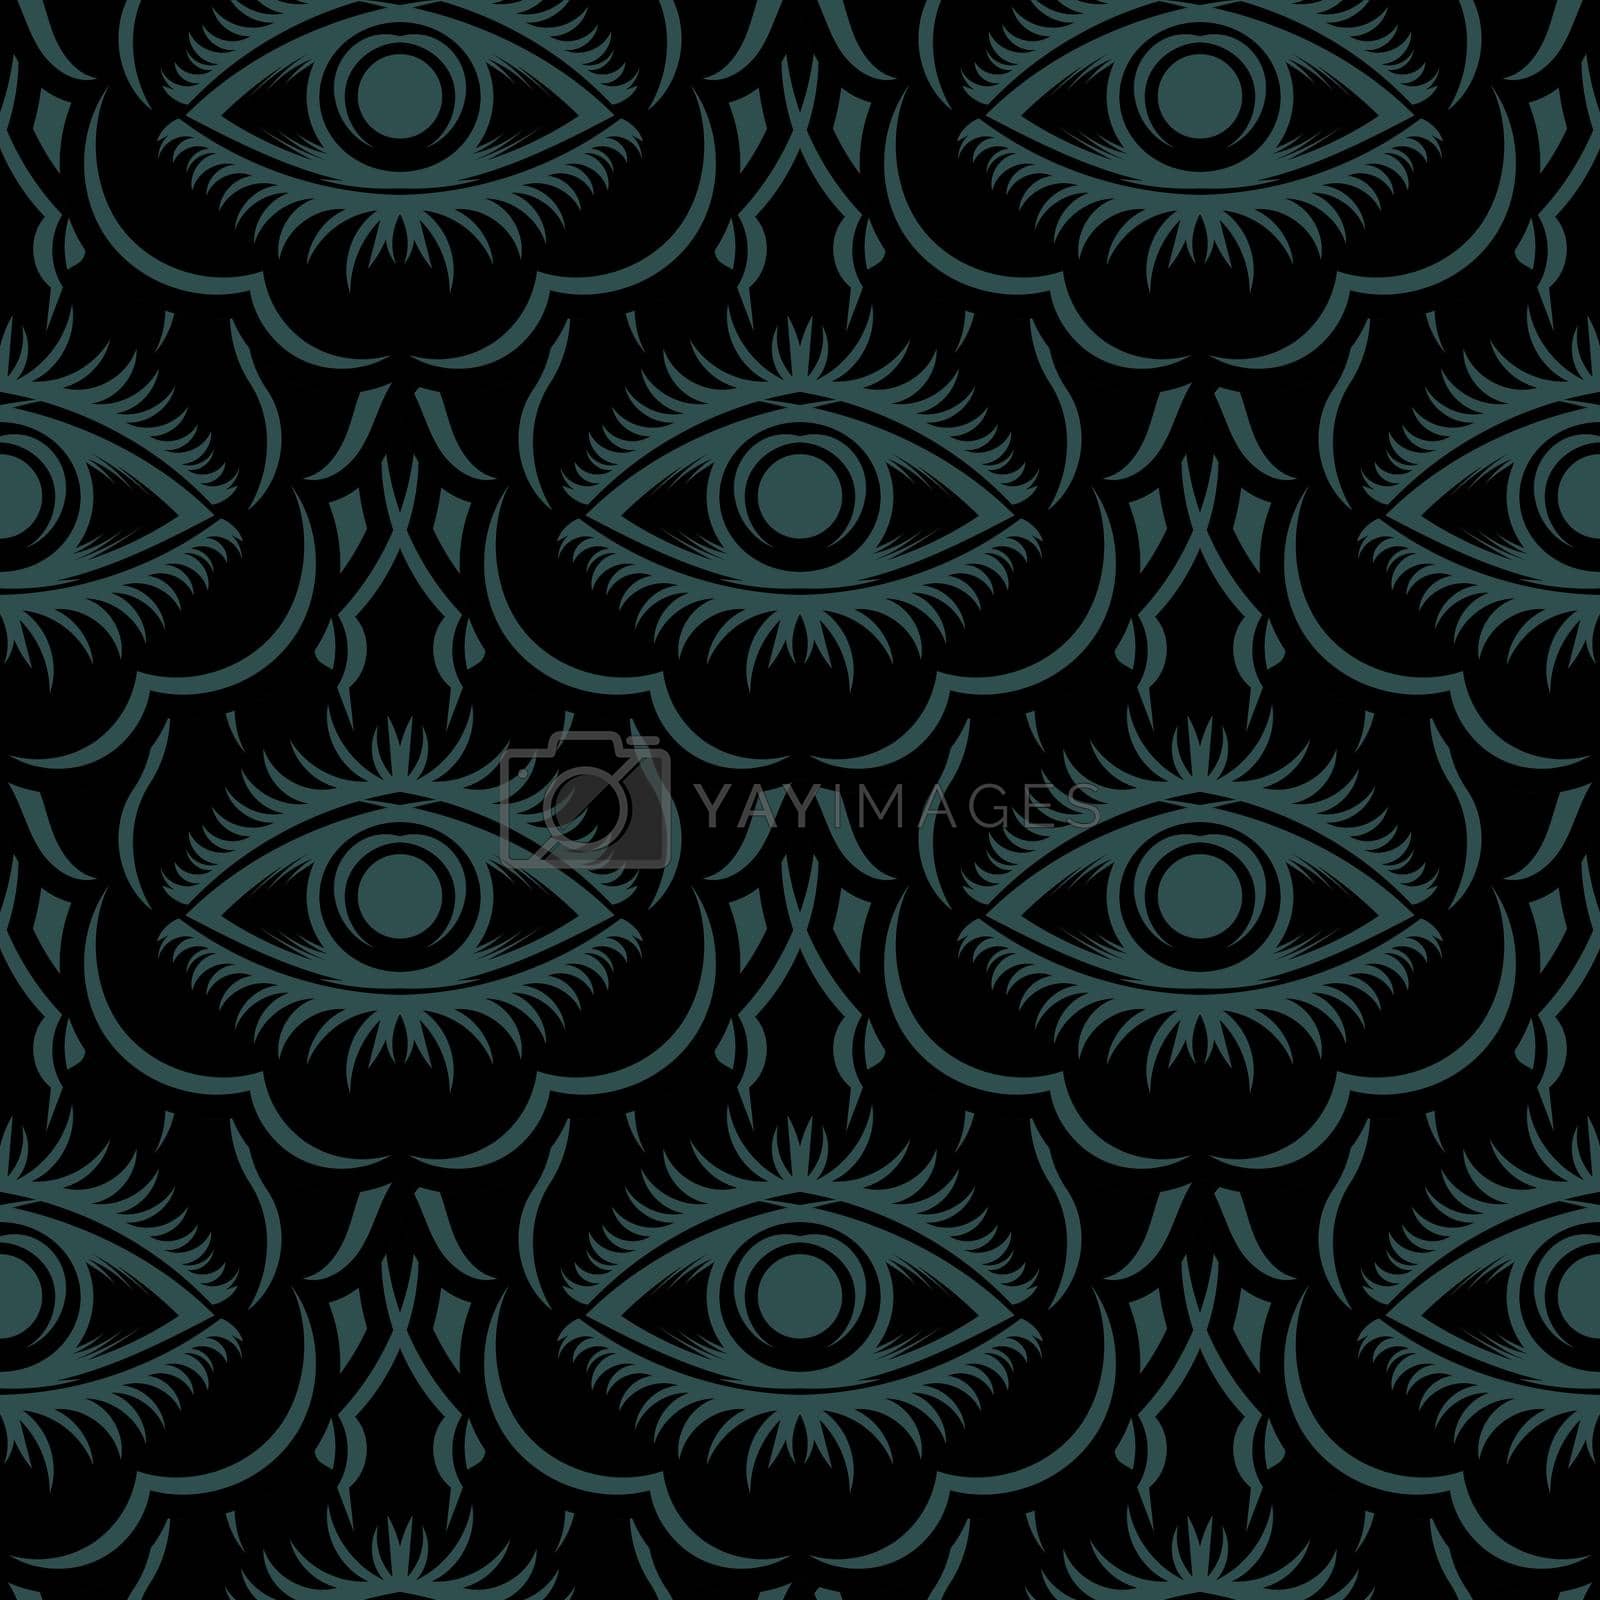 Dark green seamless pattern All seeing eye. Good for clothing, textiles, backgrounds and prints. Vector illustration.